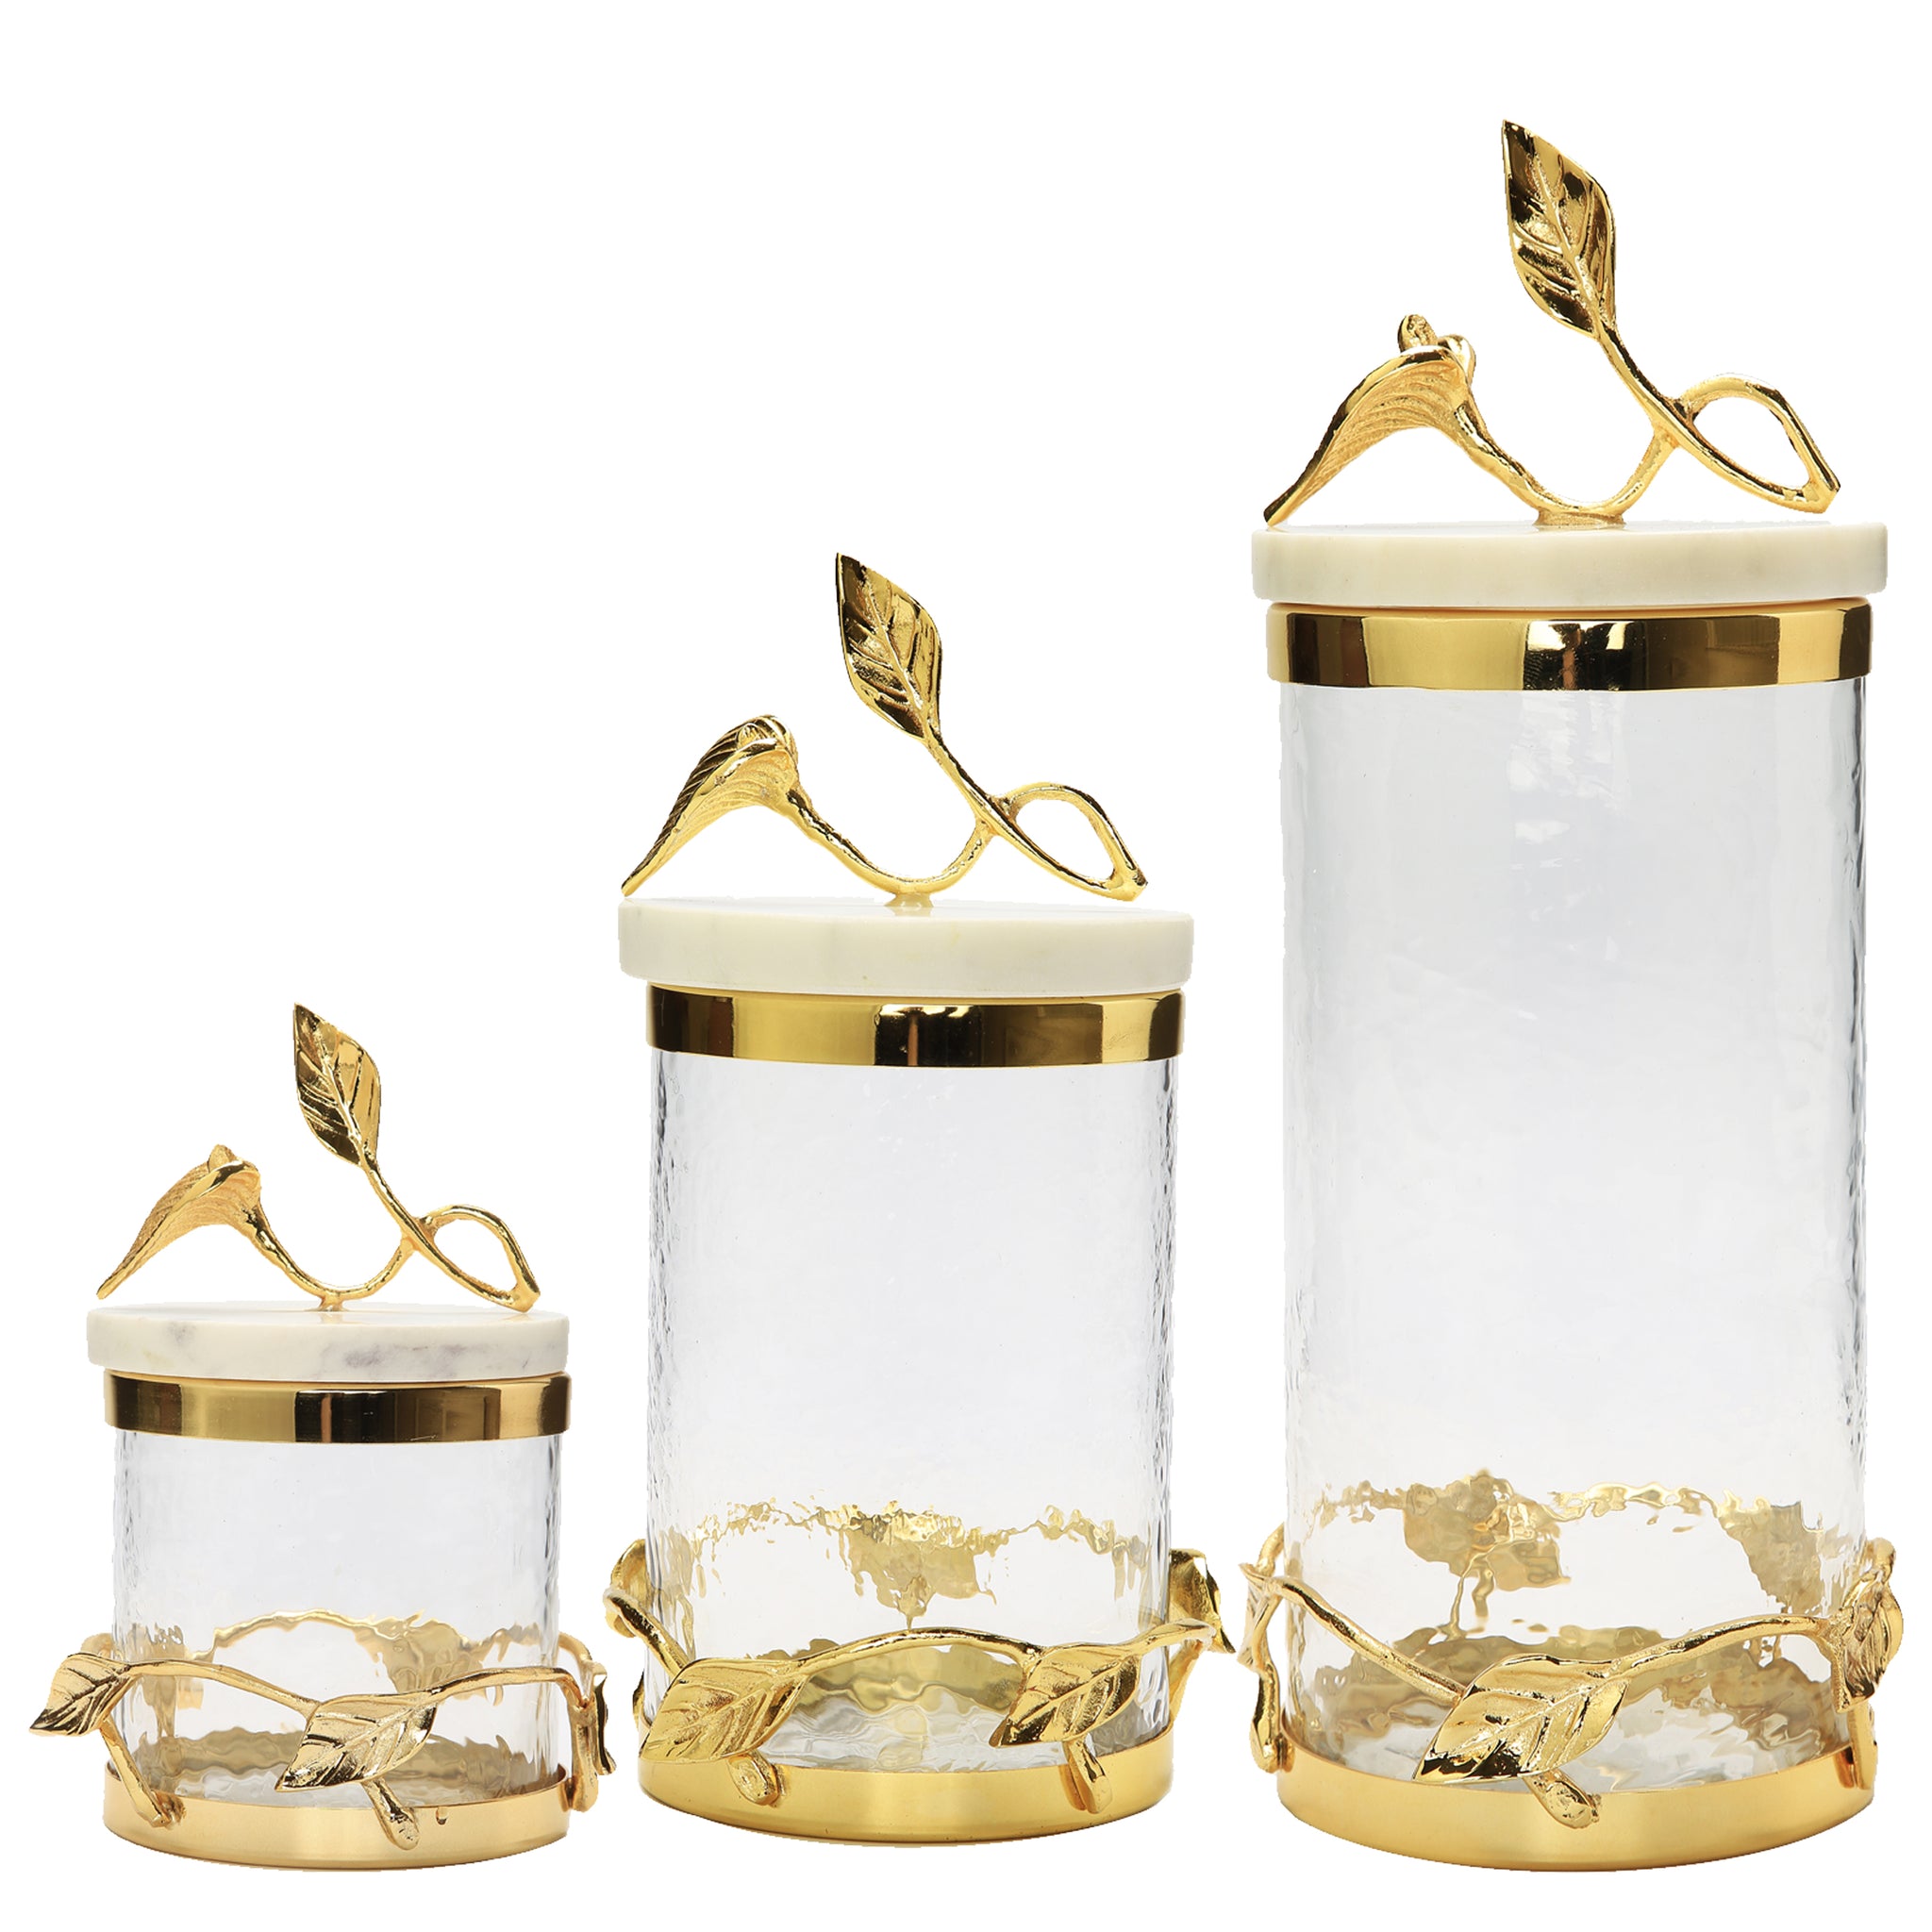 Blown Glass Canisters Collection - Grape Leaf Kitchen Canister - GKC004